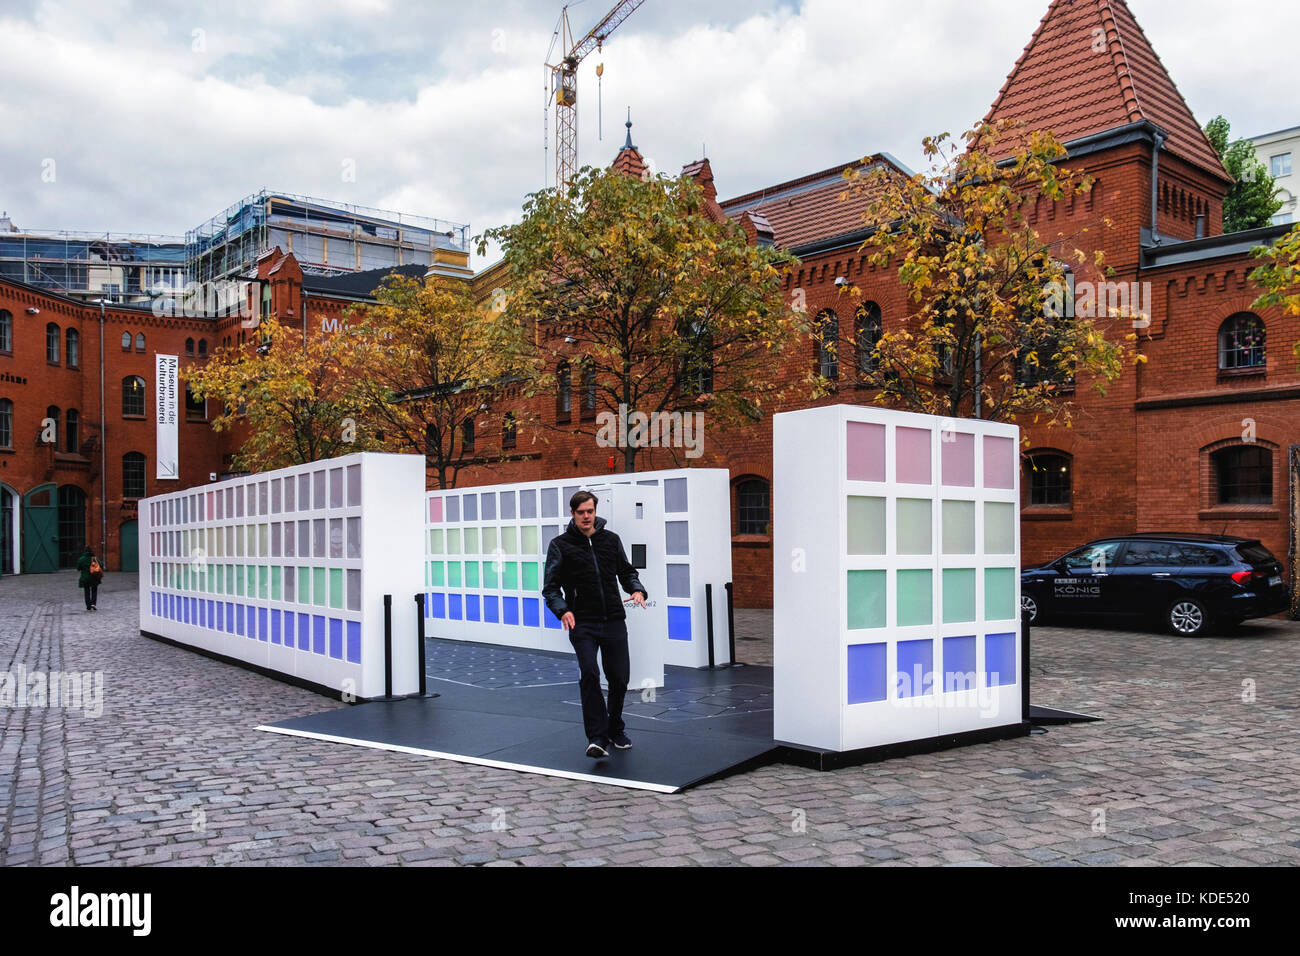 Berlin, Germany. 13th October, 2017. People enjoy an Energy harvesting  pathway - a colourful, interactive installation created by Tech giant  Google & startup company Pavegen that specializes in developing technology  for smart